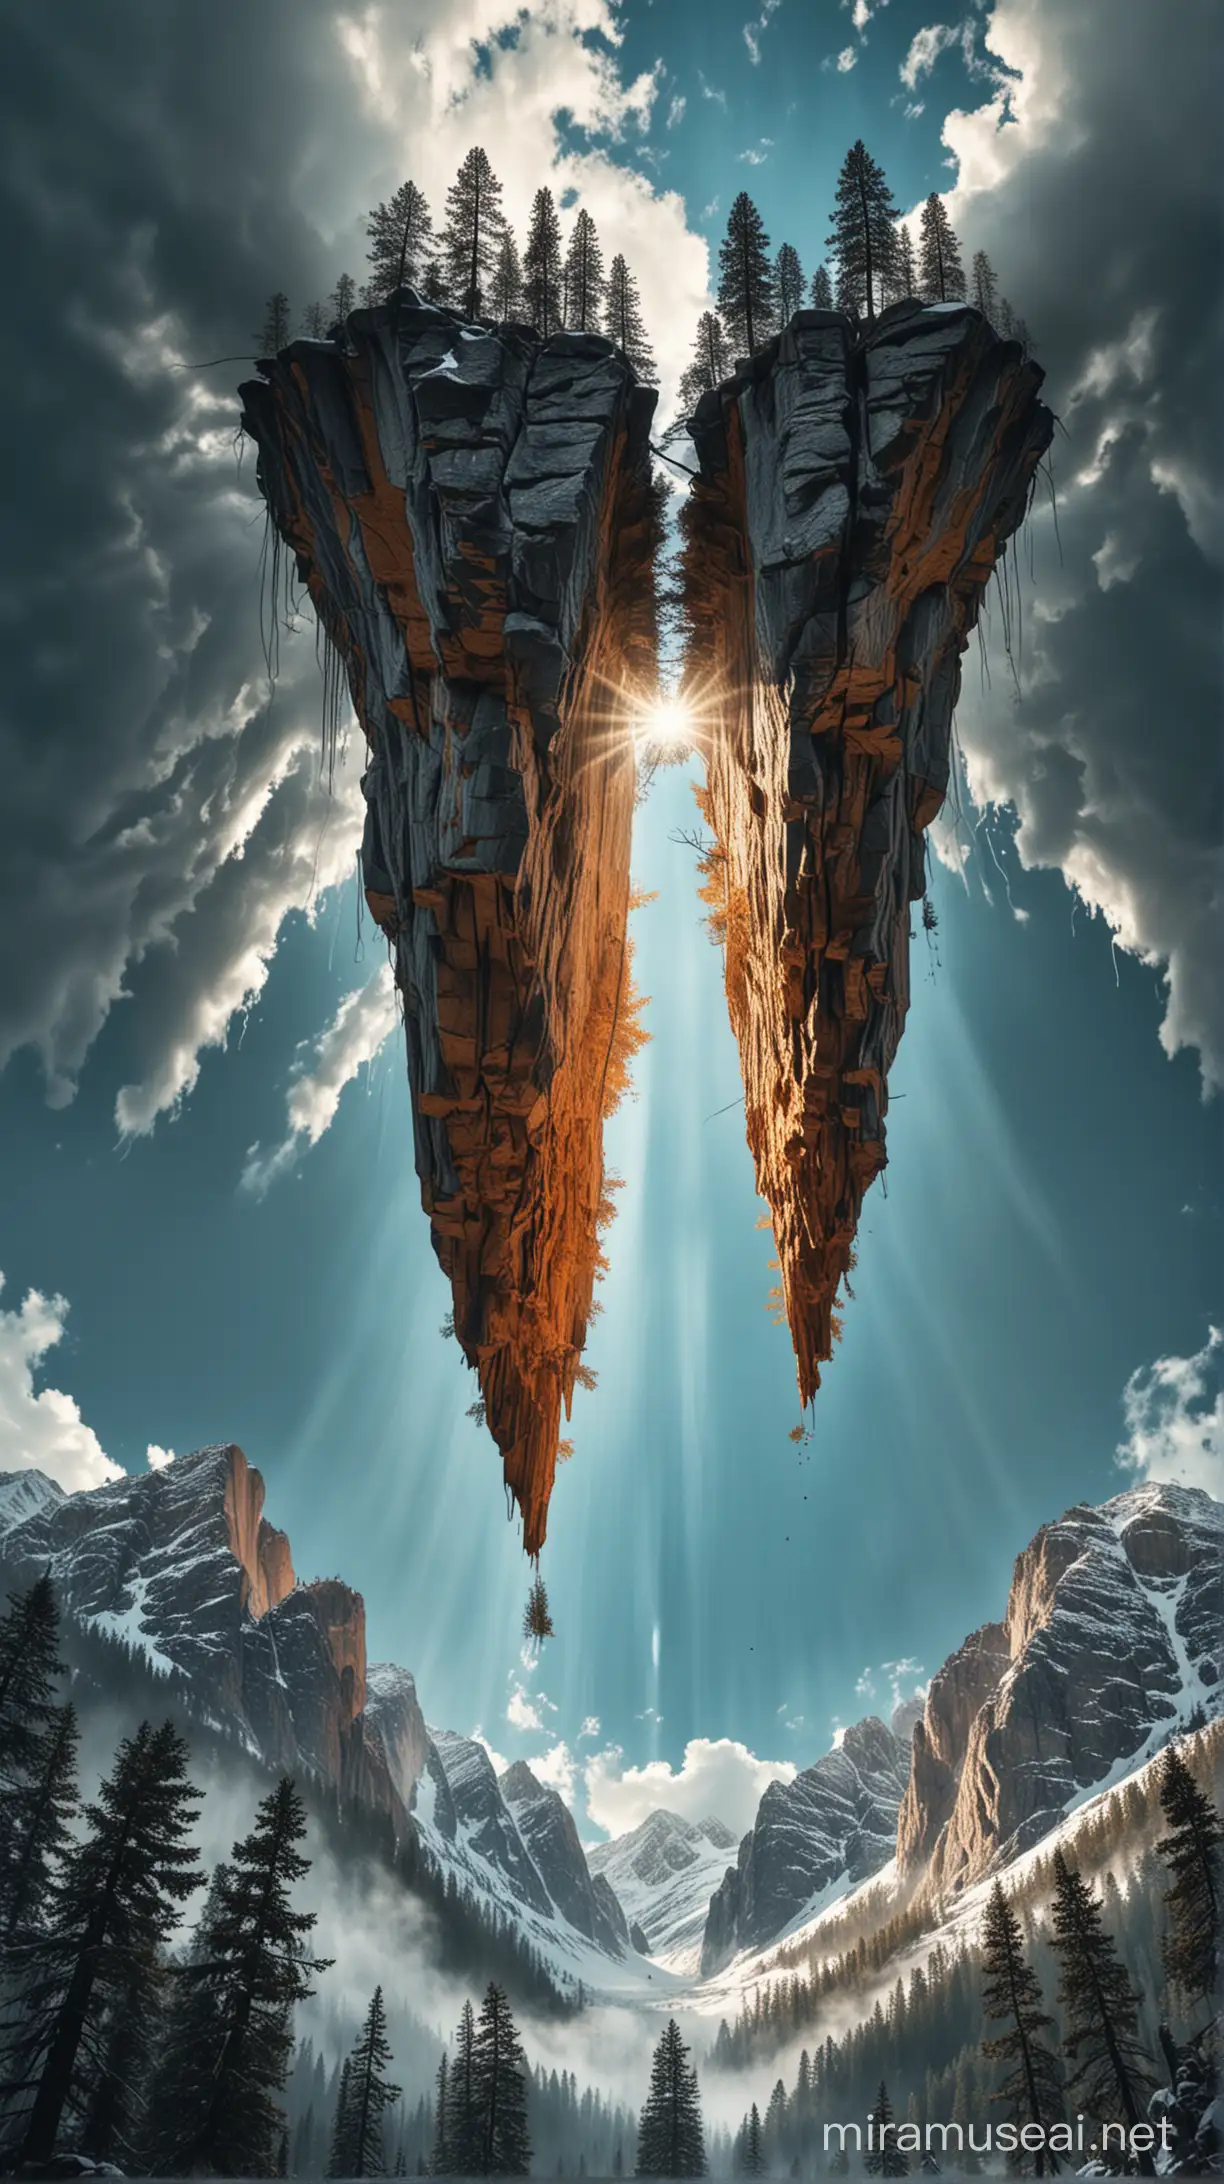 Surreal Sky Landscape with Inverted Mountains and Hanging Trees